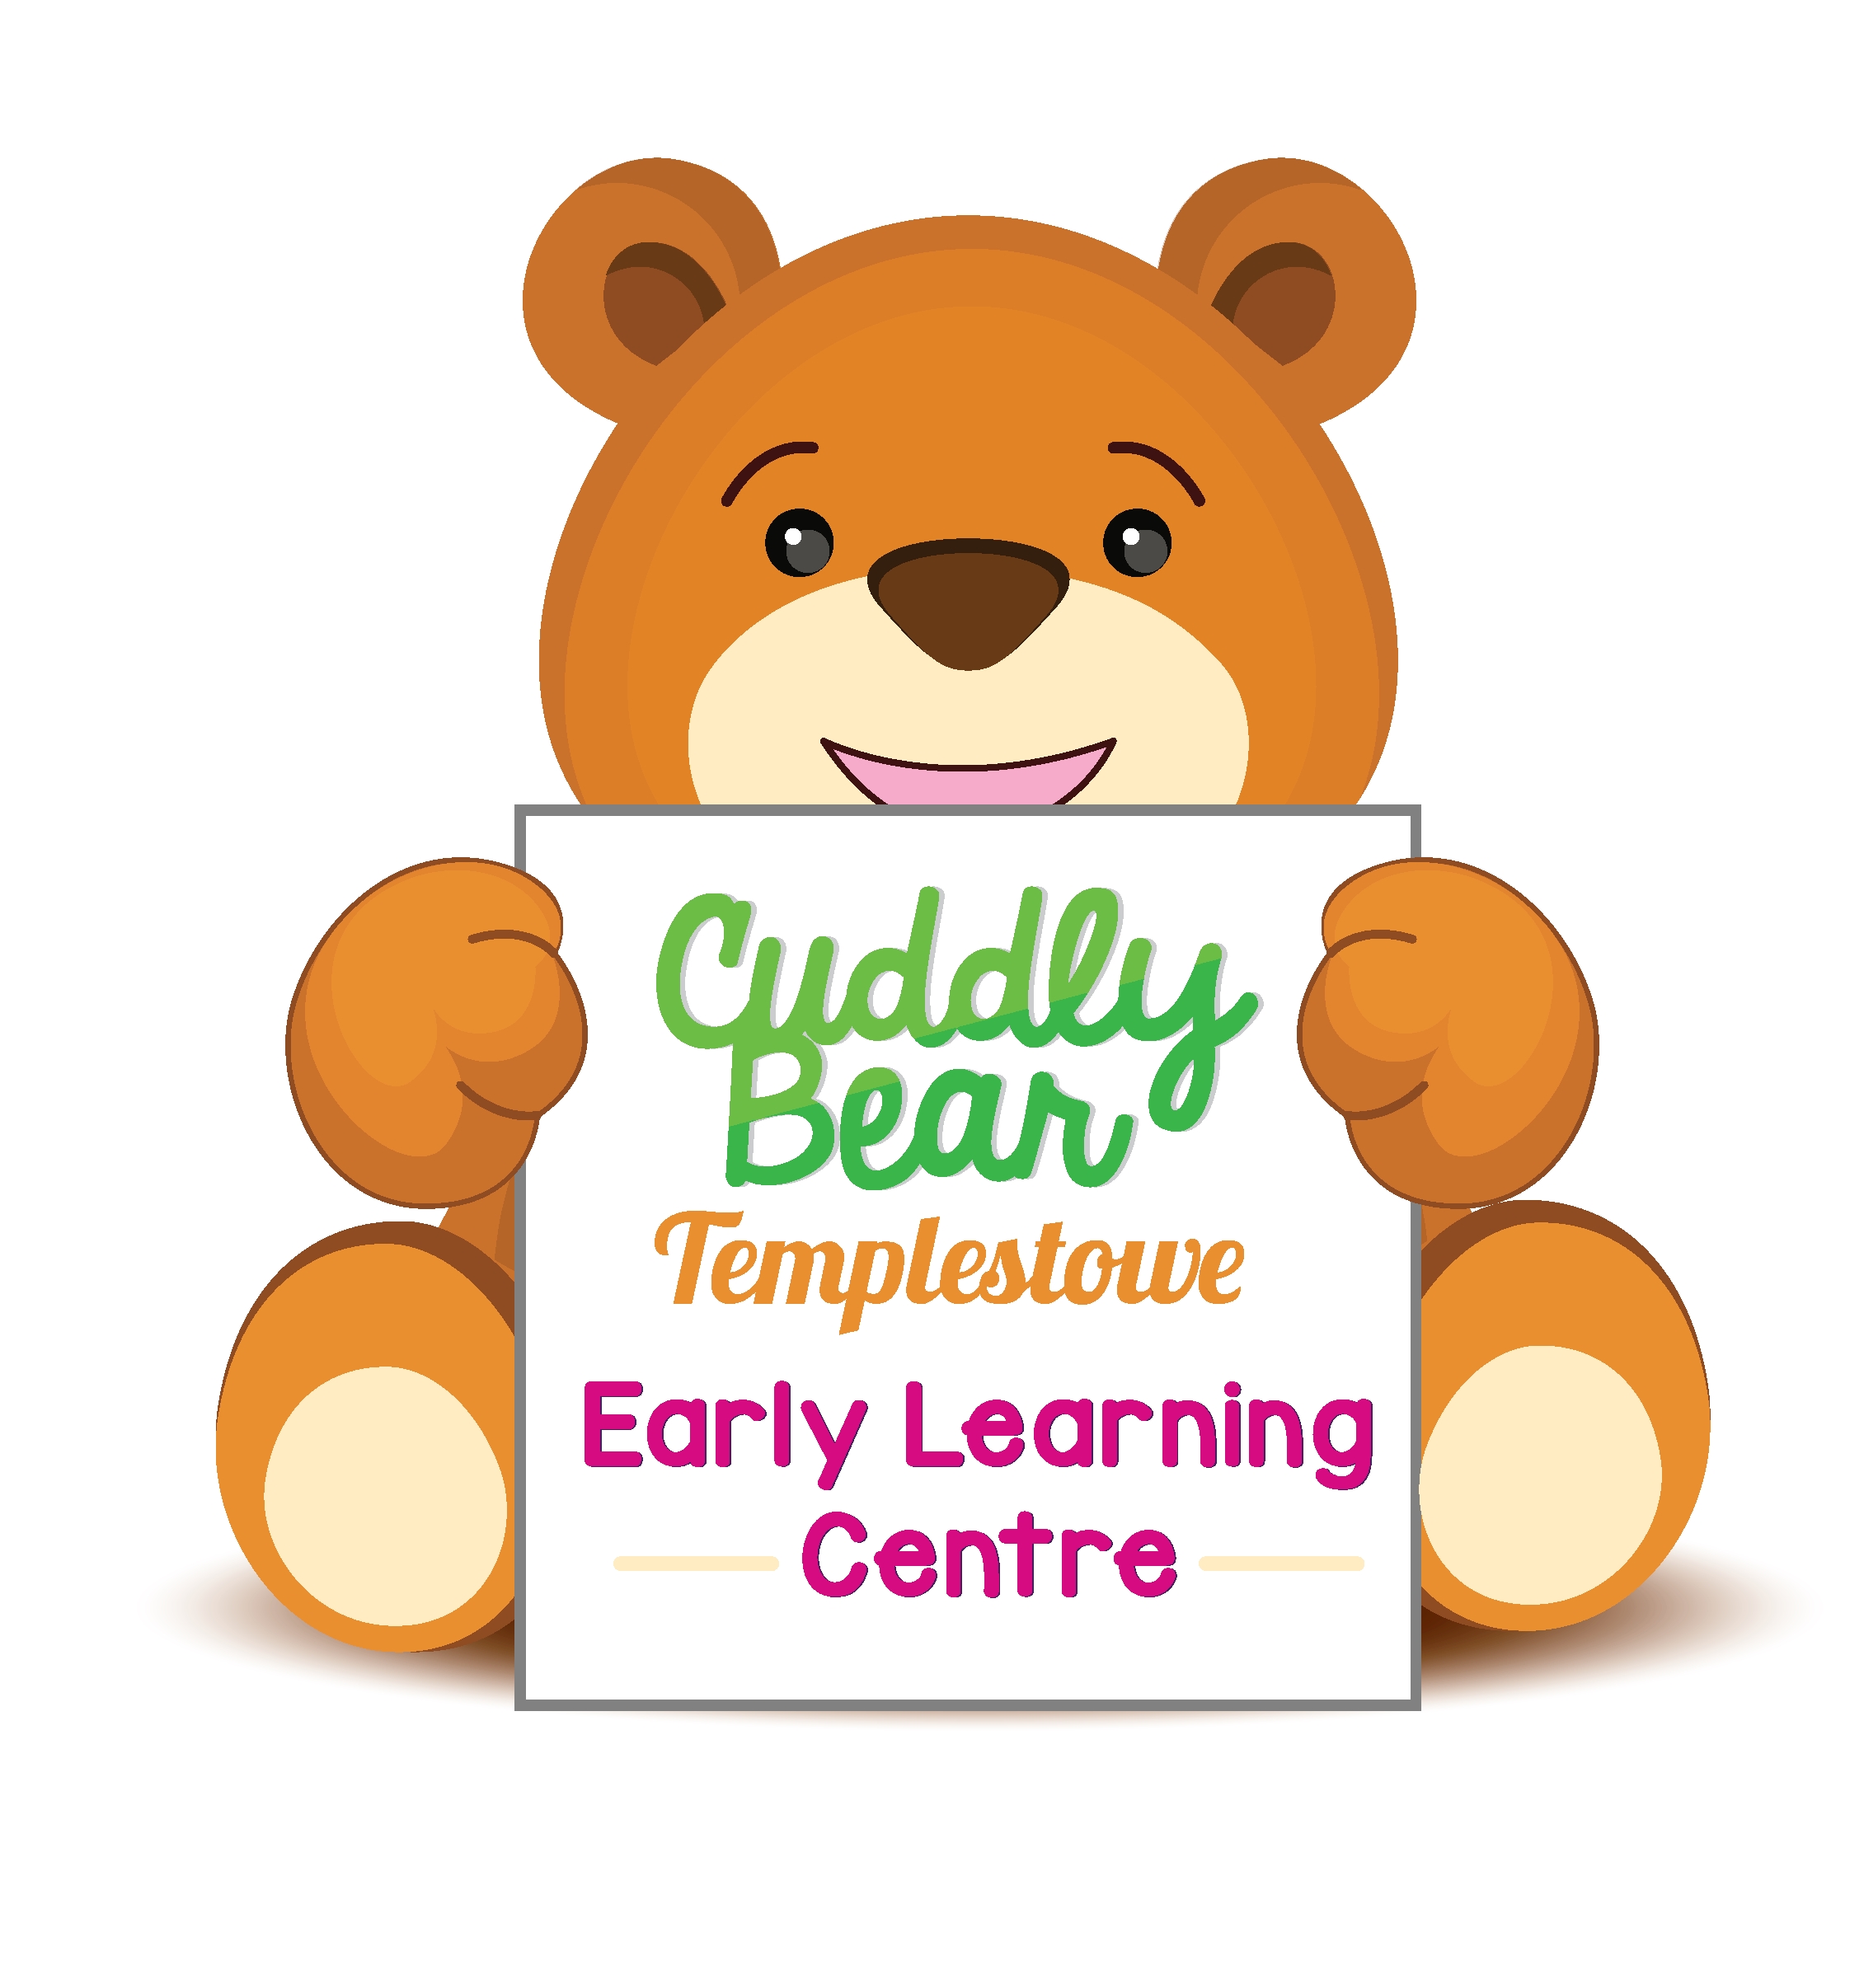 Cuddly Bear Templestowe Early Learning Centre